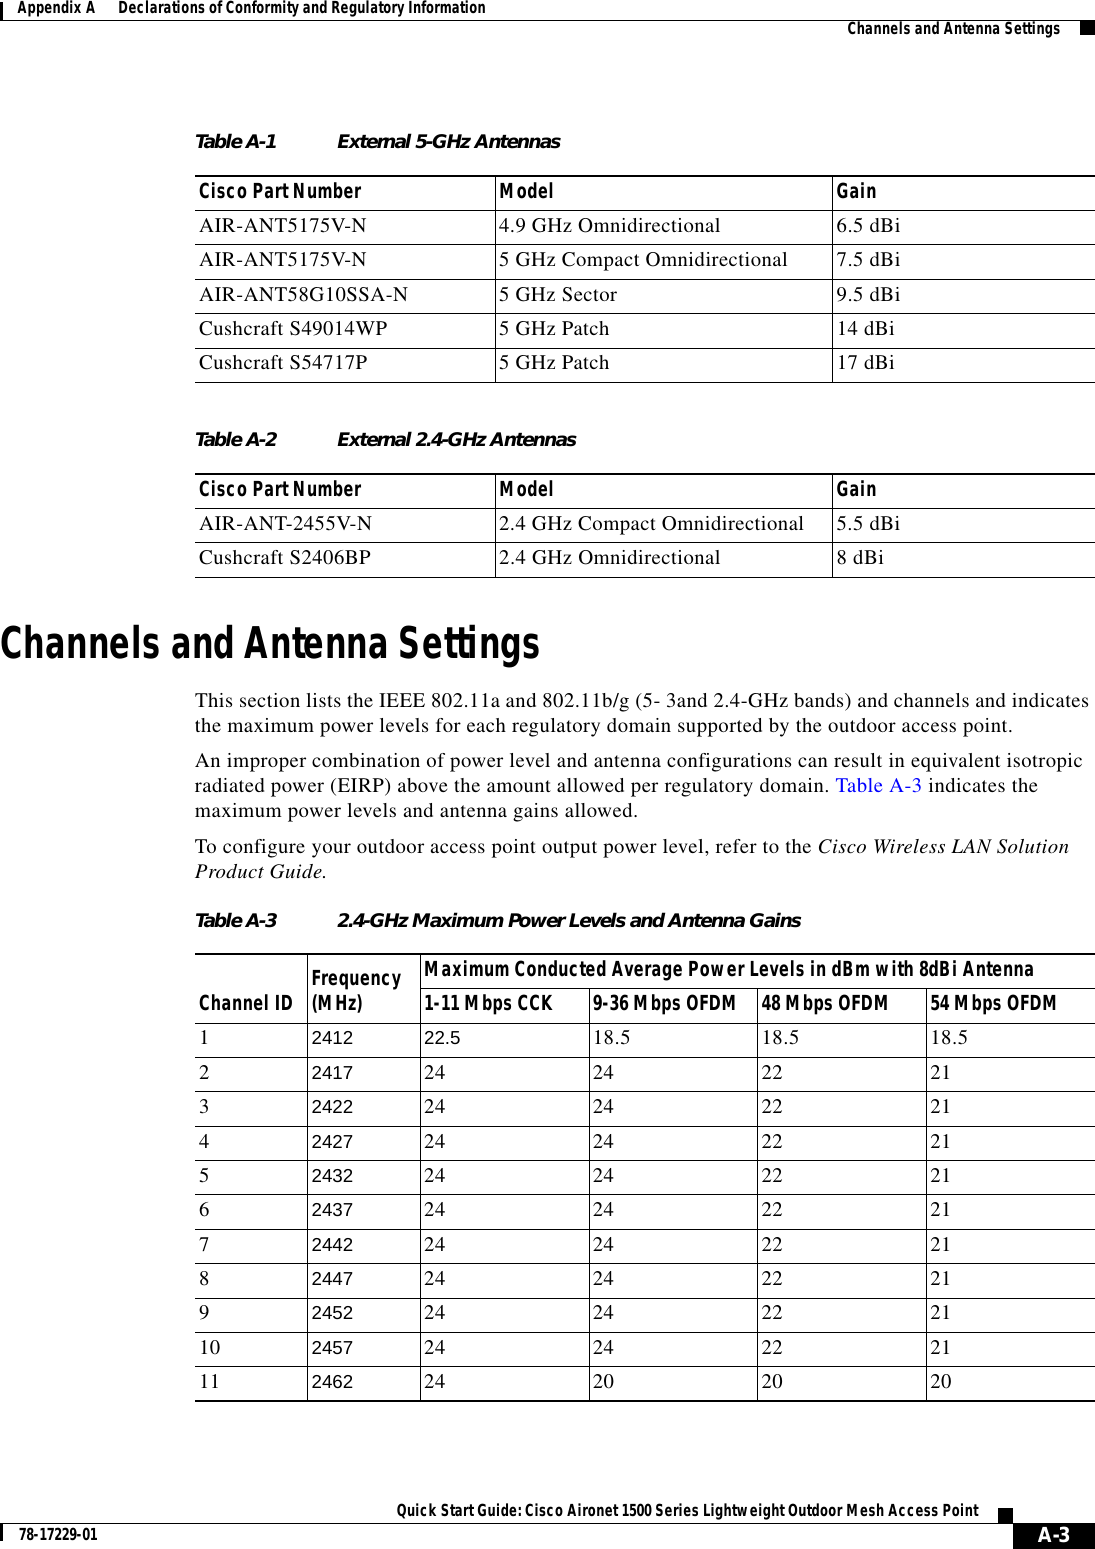  A-3Quick Start Guide: Cisco Aironet 1500 Series Lightweight Outdoor Mesh Access Point78-17229-01Appendix A      Declarations of Conformity and Regulatory Information   Channels and Antenna SettingsChannels and Antenna SettingsThis section lists the IEEE 802.11a and 802.11b/g (5- 3and 2.4-GHz bands) and channels and indicates the maximum power levels for each regulatory domain supported by the outdoor access point. An improper combination of power level and antenna configurations can result in equivalent isotropic radiated power (EIRP) above the amount allowed per regulatory domain. Table A-3 indicates the maximum power levels and antenna gains allowed.To configure your outdoor access point output power level, refer to the Cisco Wireless LAN Solution Product Guide.Table A-1 External 5-GHz AntennasCisco Part Number Model GainAIR-ANT5175V-N 4.9 GHz Omnidirectional 6.5 dBiAIR-ANT5175V-N 5 GHz Compact Omnidirectional 7.5 dBiAIR-ANT58G10SSA-N 5 GHz Sector 9.5 dBiCushcraft S49014WP 5 GHz Patch 14 dBiCushcraft S54717P 5 GHz Patch 17 dBiTable A-2 External 2.4-GHz AntennasCisco Part Number Model GainAIR-ANT-2455V-N 2.4 GHz Compact Omnidirectional 5.5 dBiCushcraft S2406BP 2.4 GHz Omnidirectional 8 dBiTable A-3 2.4-GHz Maximum Power Levels and Antenna GainsChannel ID Frequency (MHz)Maximum Conducted Average Power Levels in dBm with 8dBi Antenna1-11 Mbps CCK 9-36 Mbps OFDM 48 Mbps OFDM 54 Mbps OFDM12412 22.5 18.5 18.5 18.522417 24 24 22 2132422 24 24 22 2142427 24 24 22 2152432 24 24 22 2162437 24 24 22 2172442 24 24 22 2182447 24 24 22 2192452 24 24 22 2110 2457 24 24 22 2111 2462 24 20 20 20